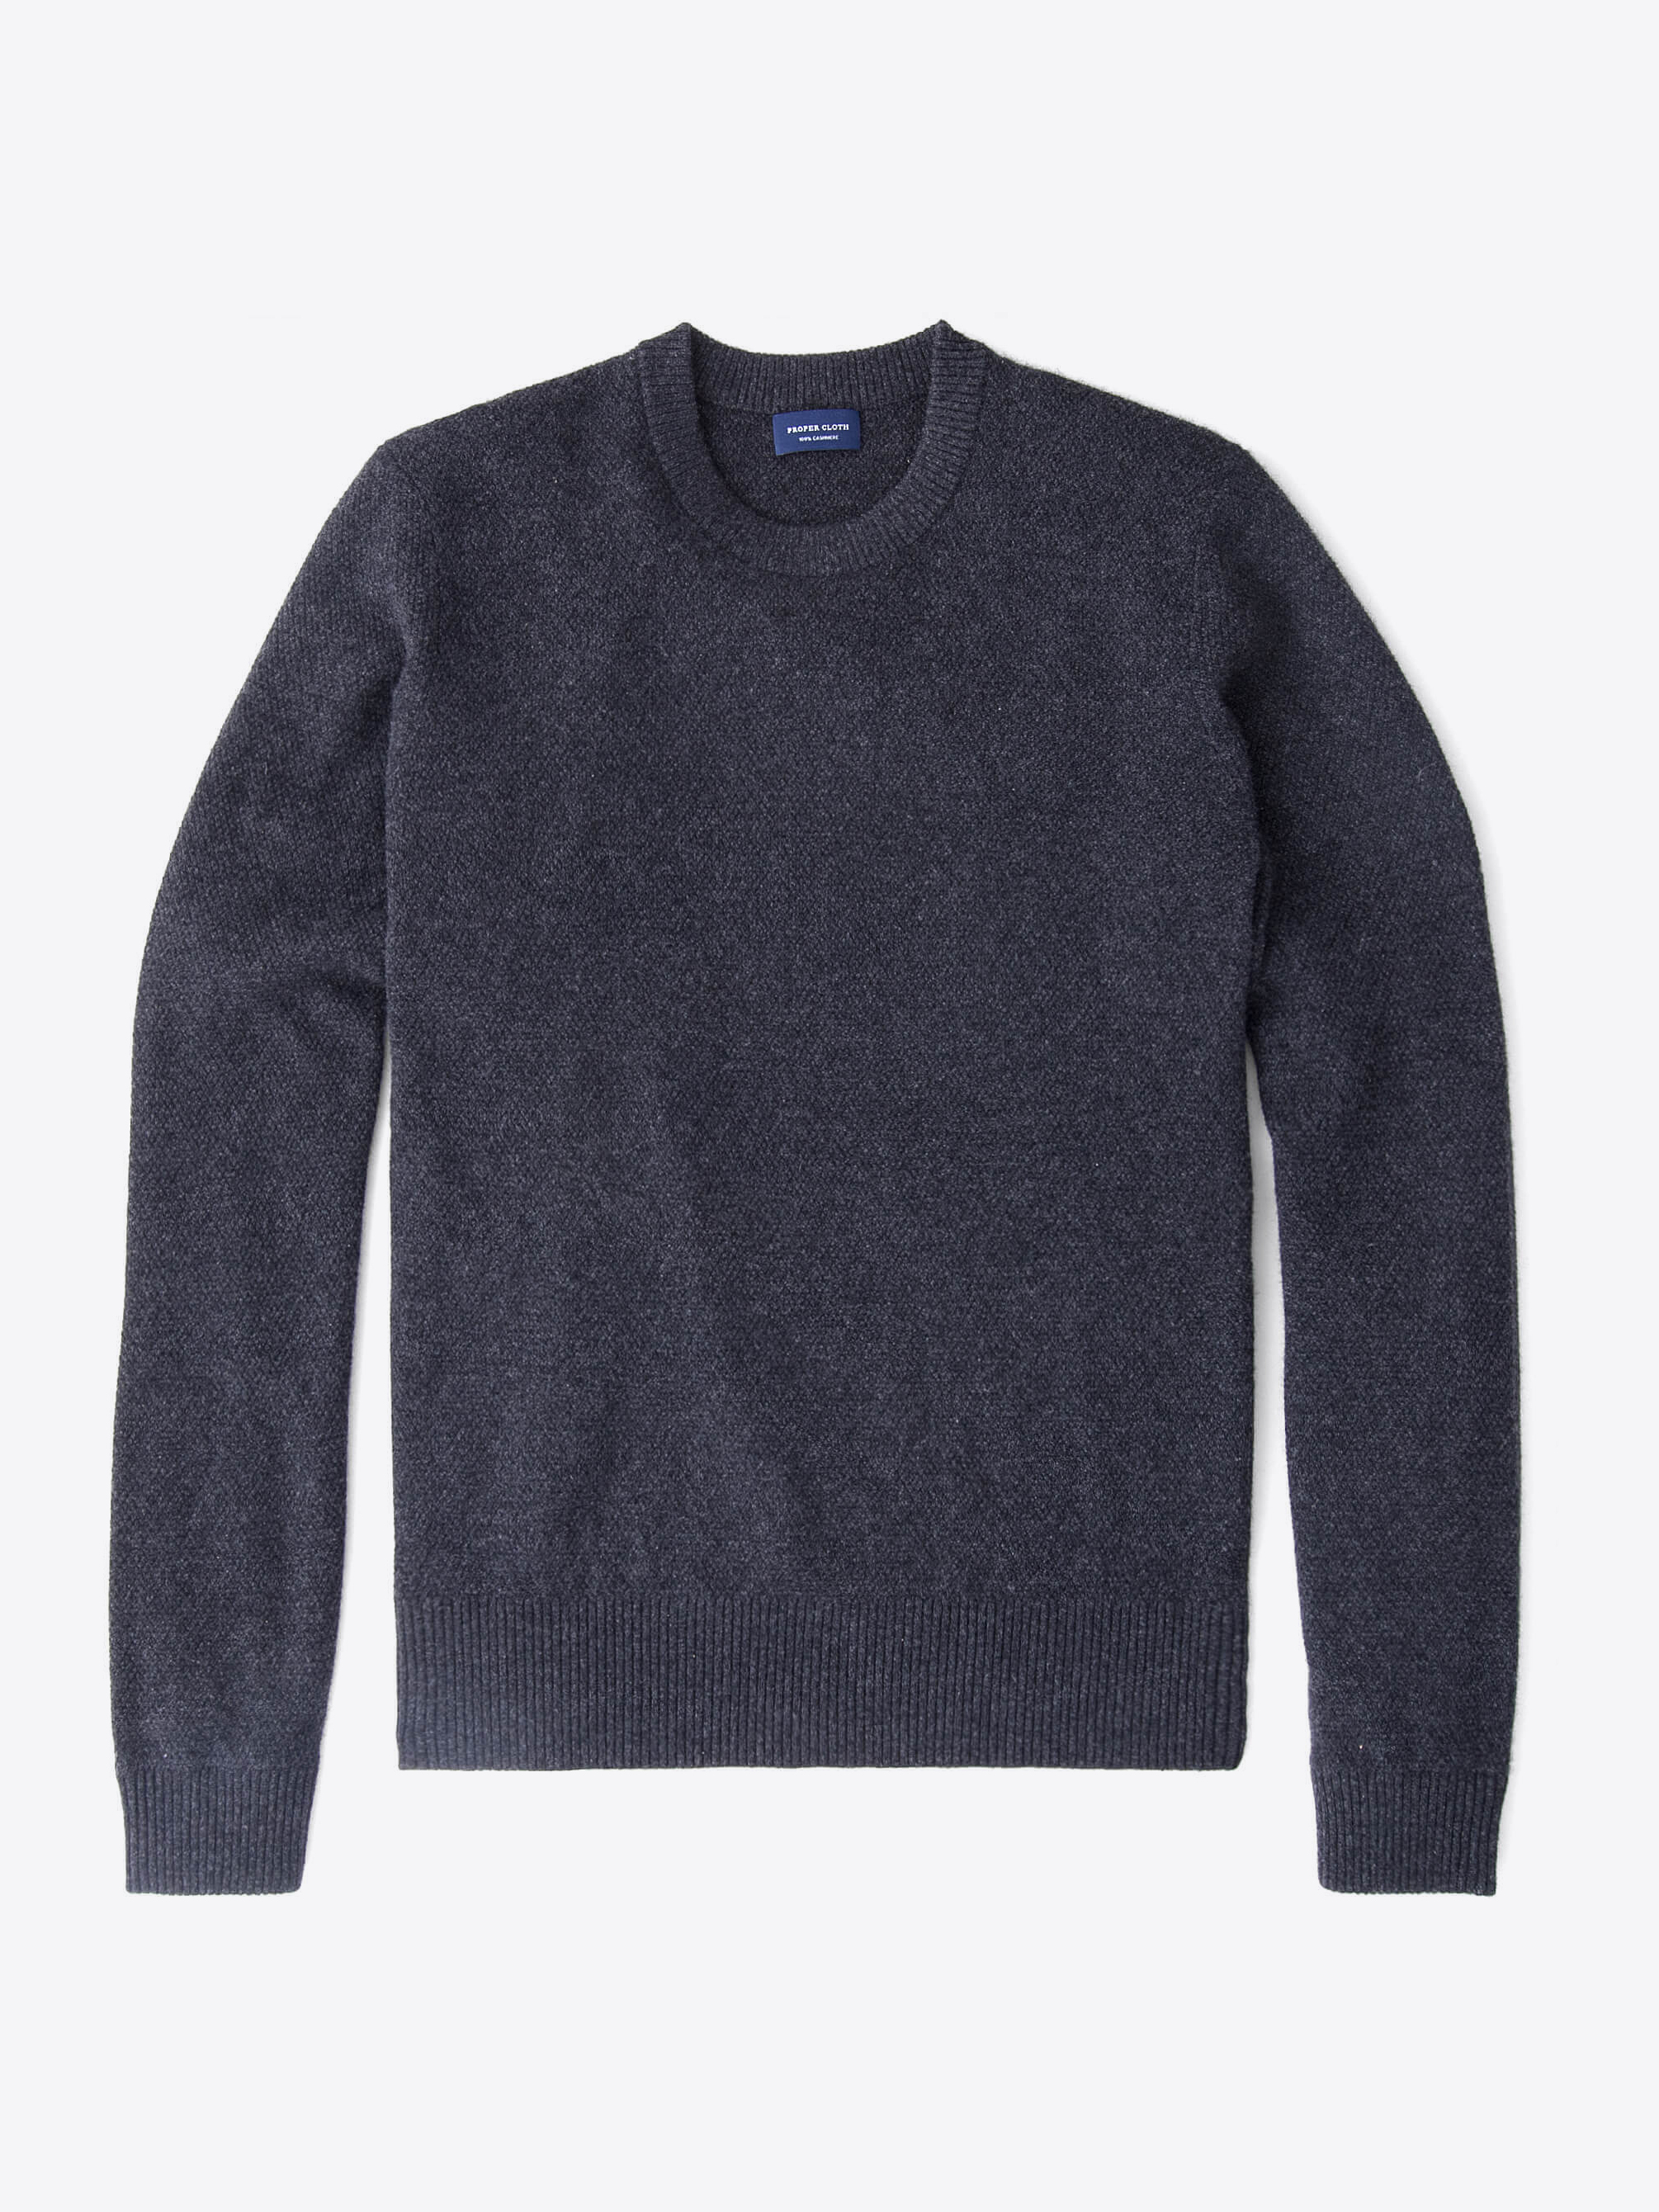 Zoom Image of Charcoal Cobble Stitch Cashmere Crewneck Sweater